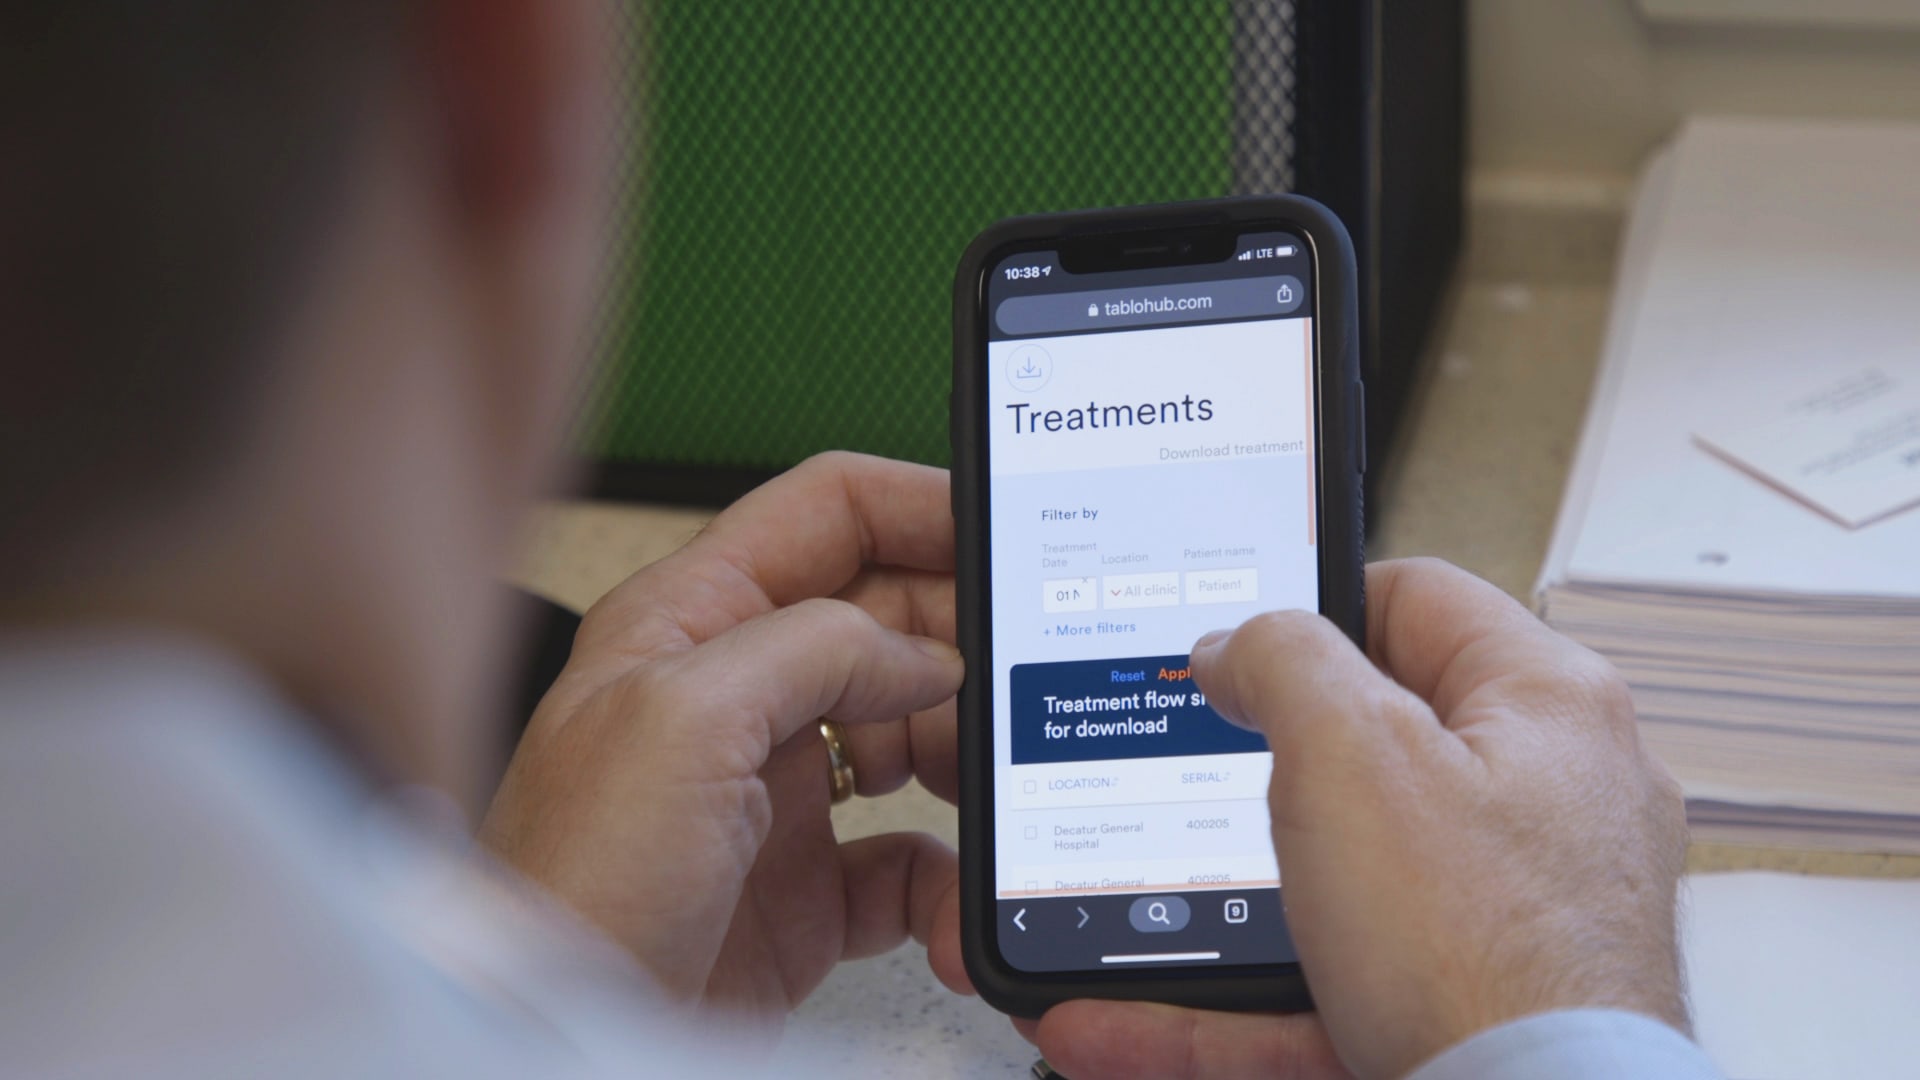 Tablo customers can view and download treatment records anytime, anywhere via Tablo Hub.